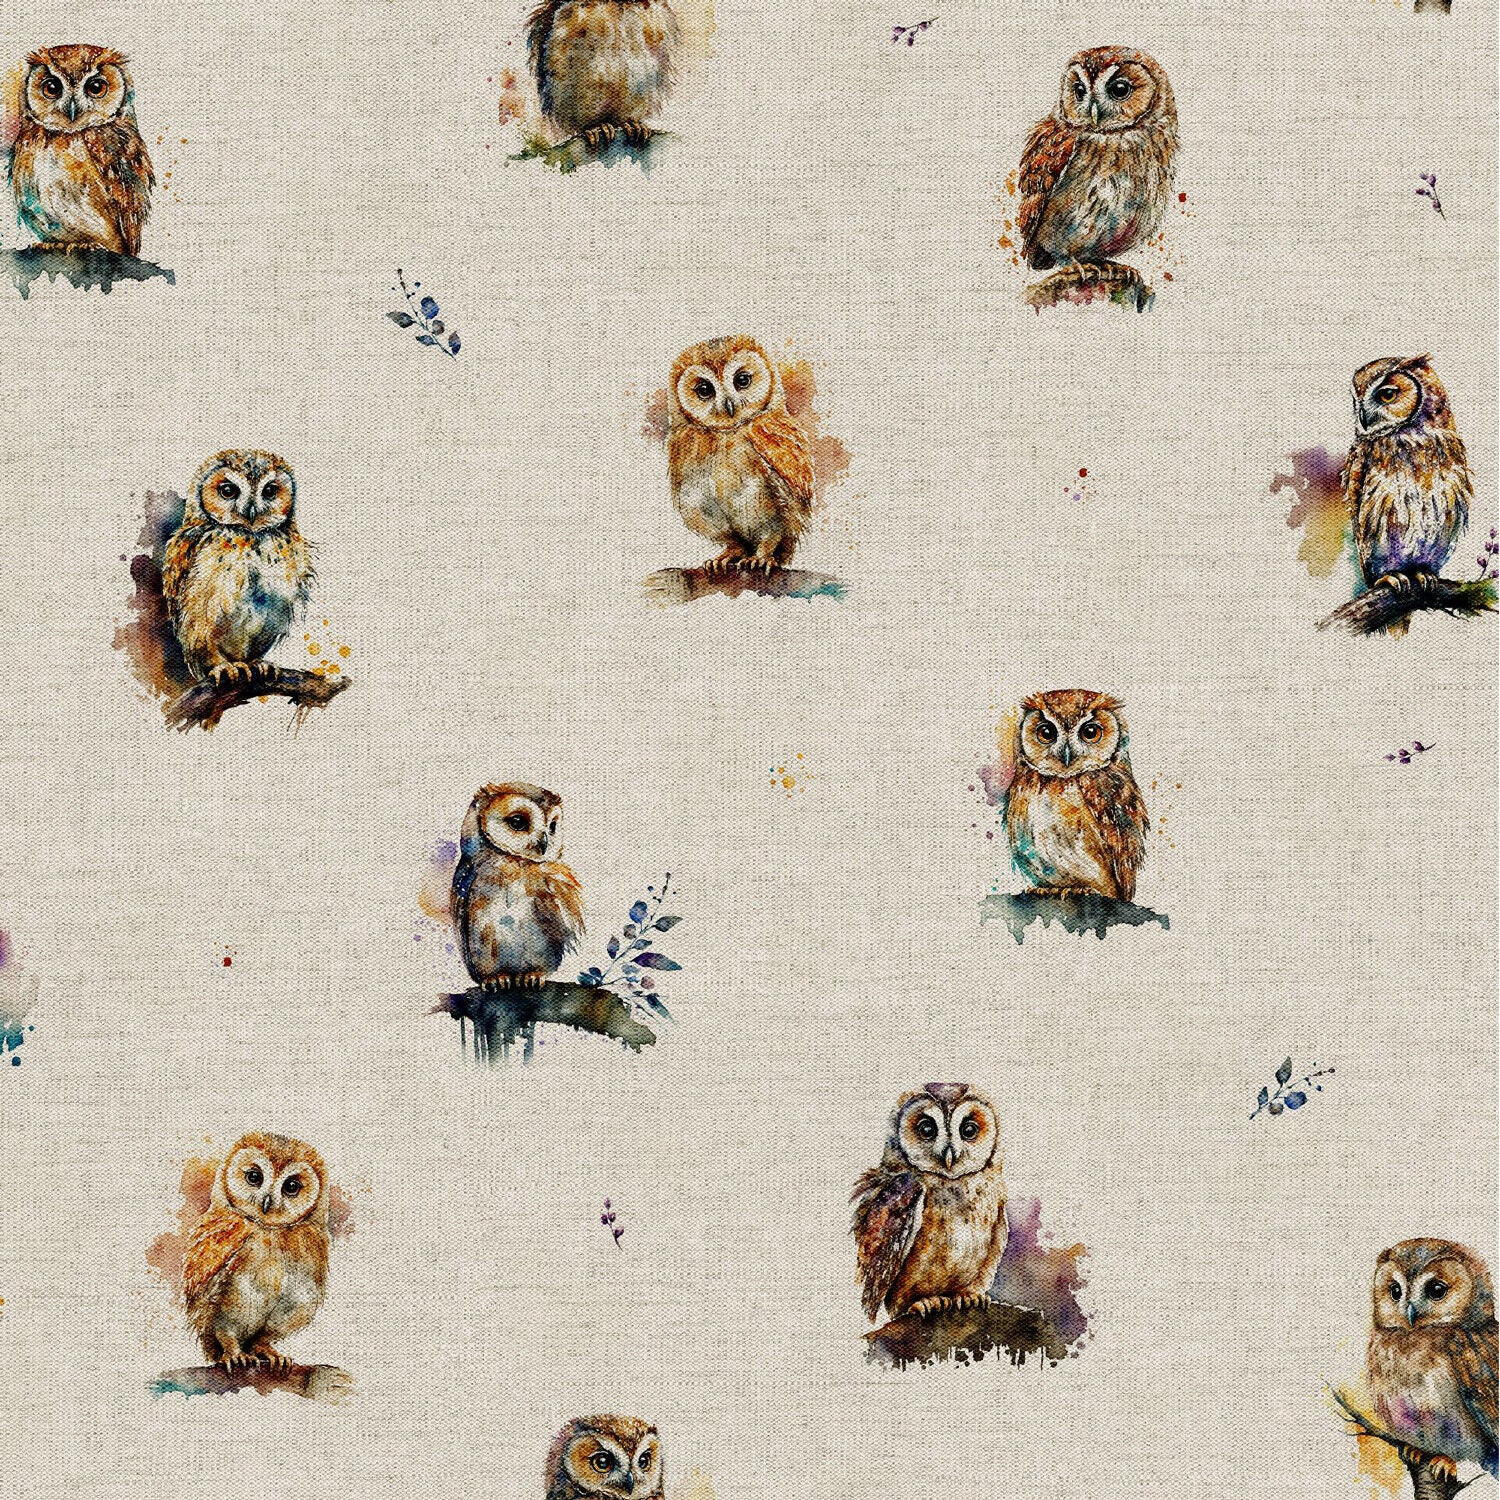 Owls Mice Robins Birds Cotton Rich Linen Look Cushion Covers fabric M1795